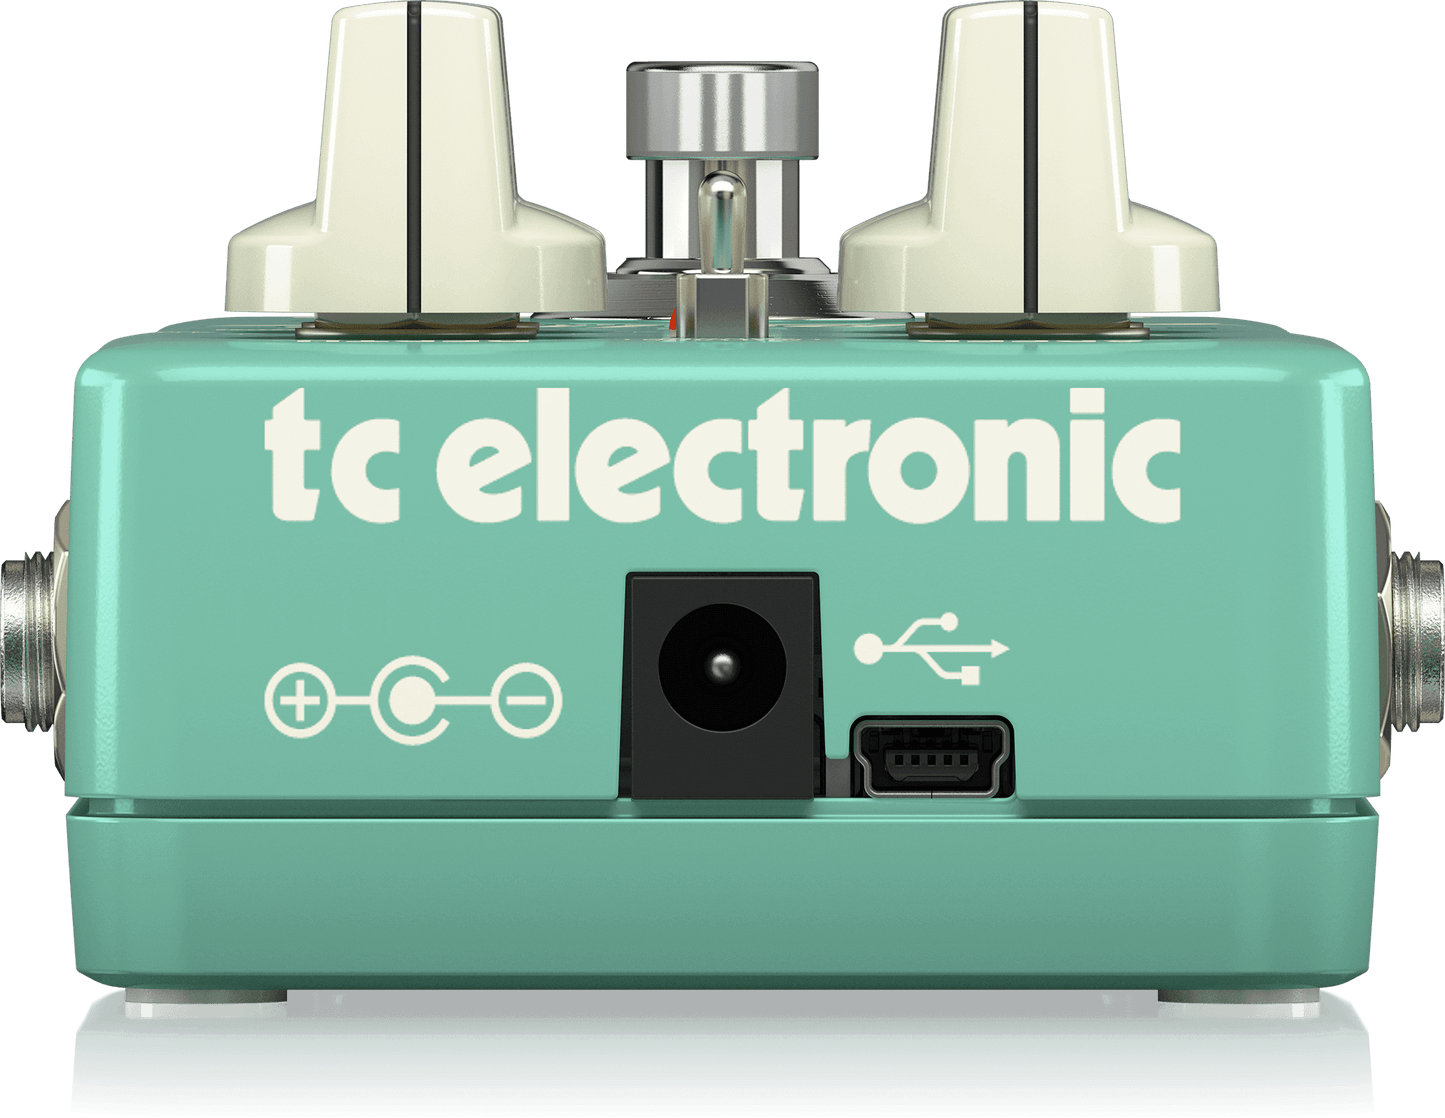 TC Electronic Pipeline Tremolo Pedal with Tap Tempo